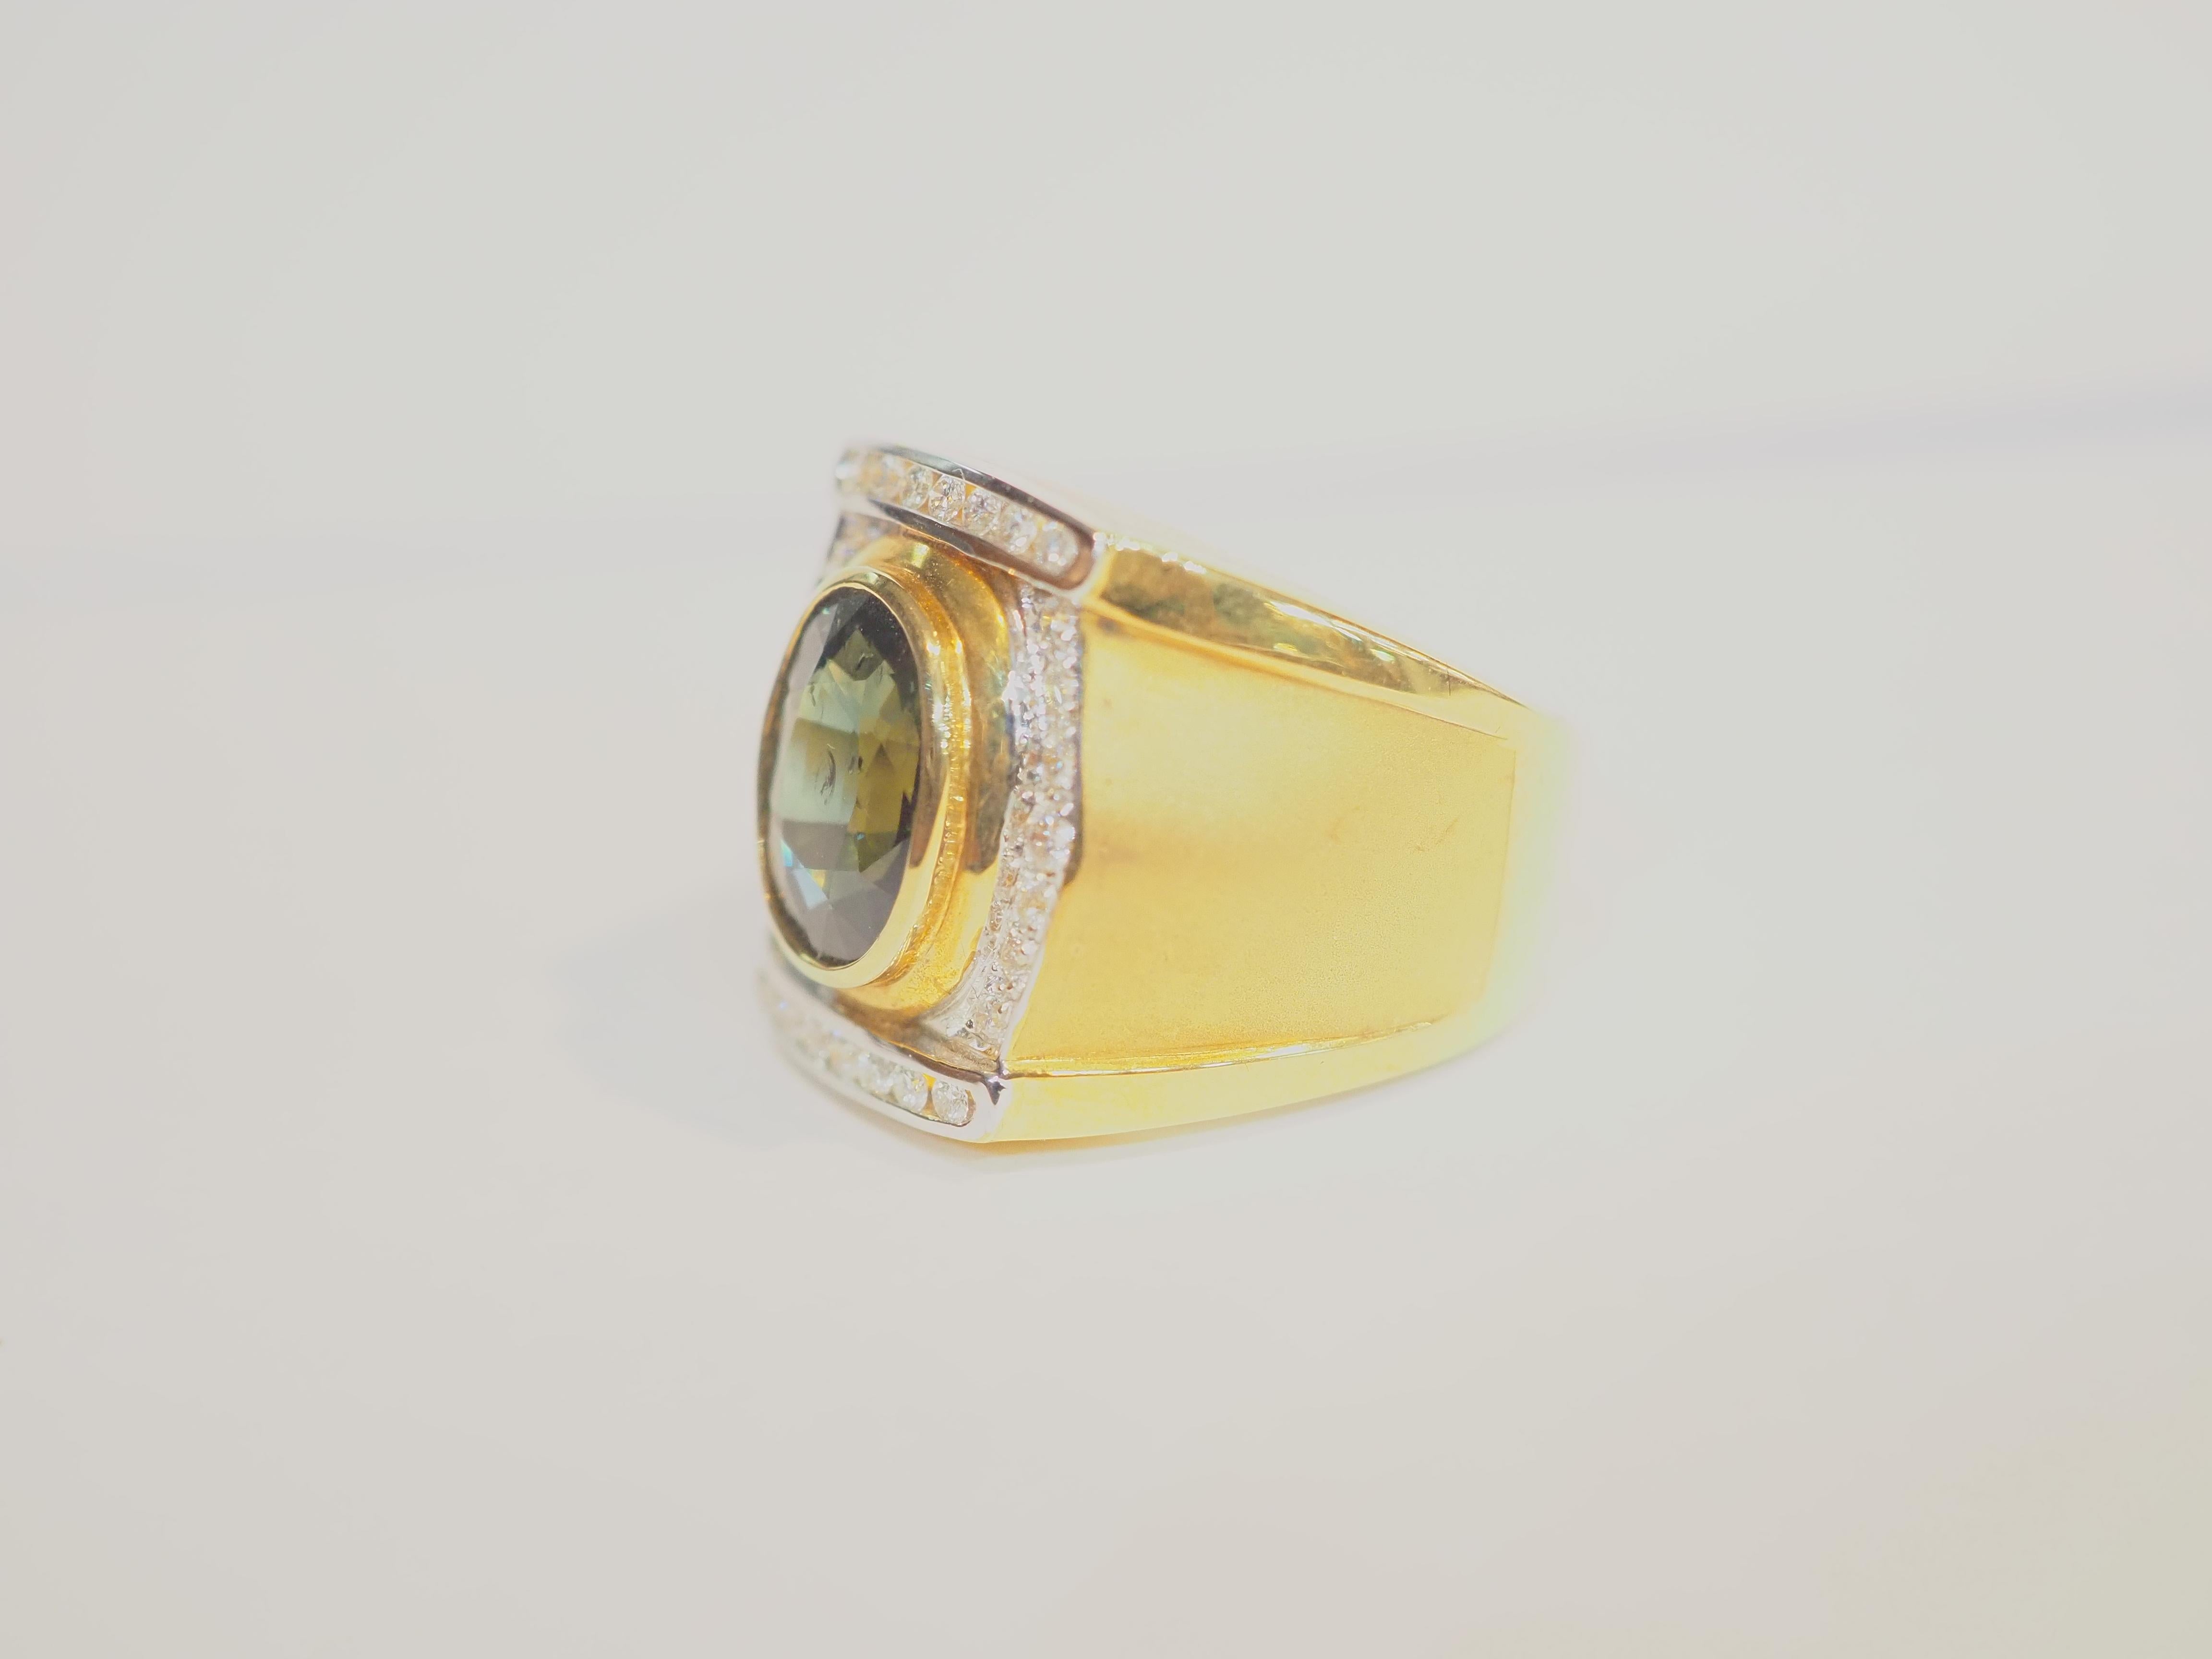  This fantastic cocktail piece is a beautiful 18K yellow gold fine signet ring for man. It features an oval dark teal blue sapphire as the main gemstone. The fire is incredible. There are multiple brilliant diamonds of good color and clarity on the